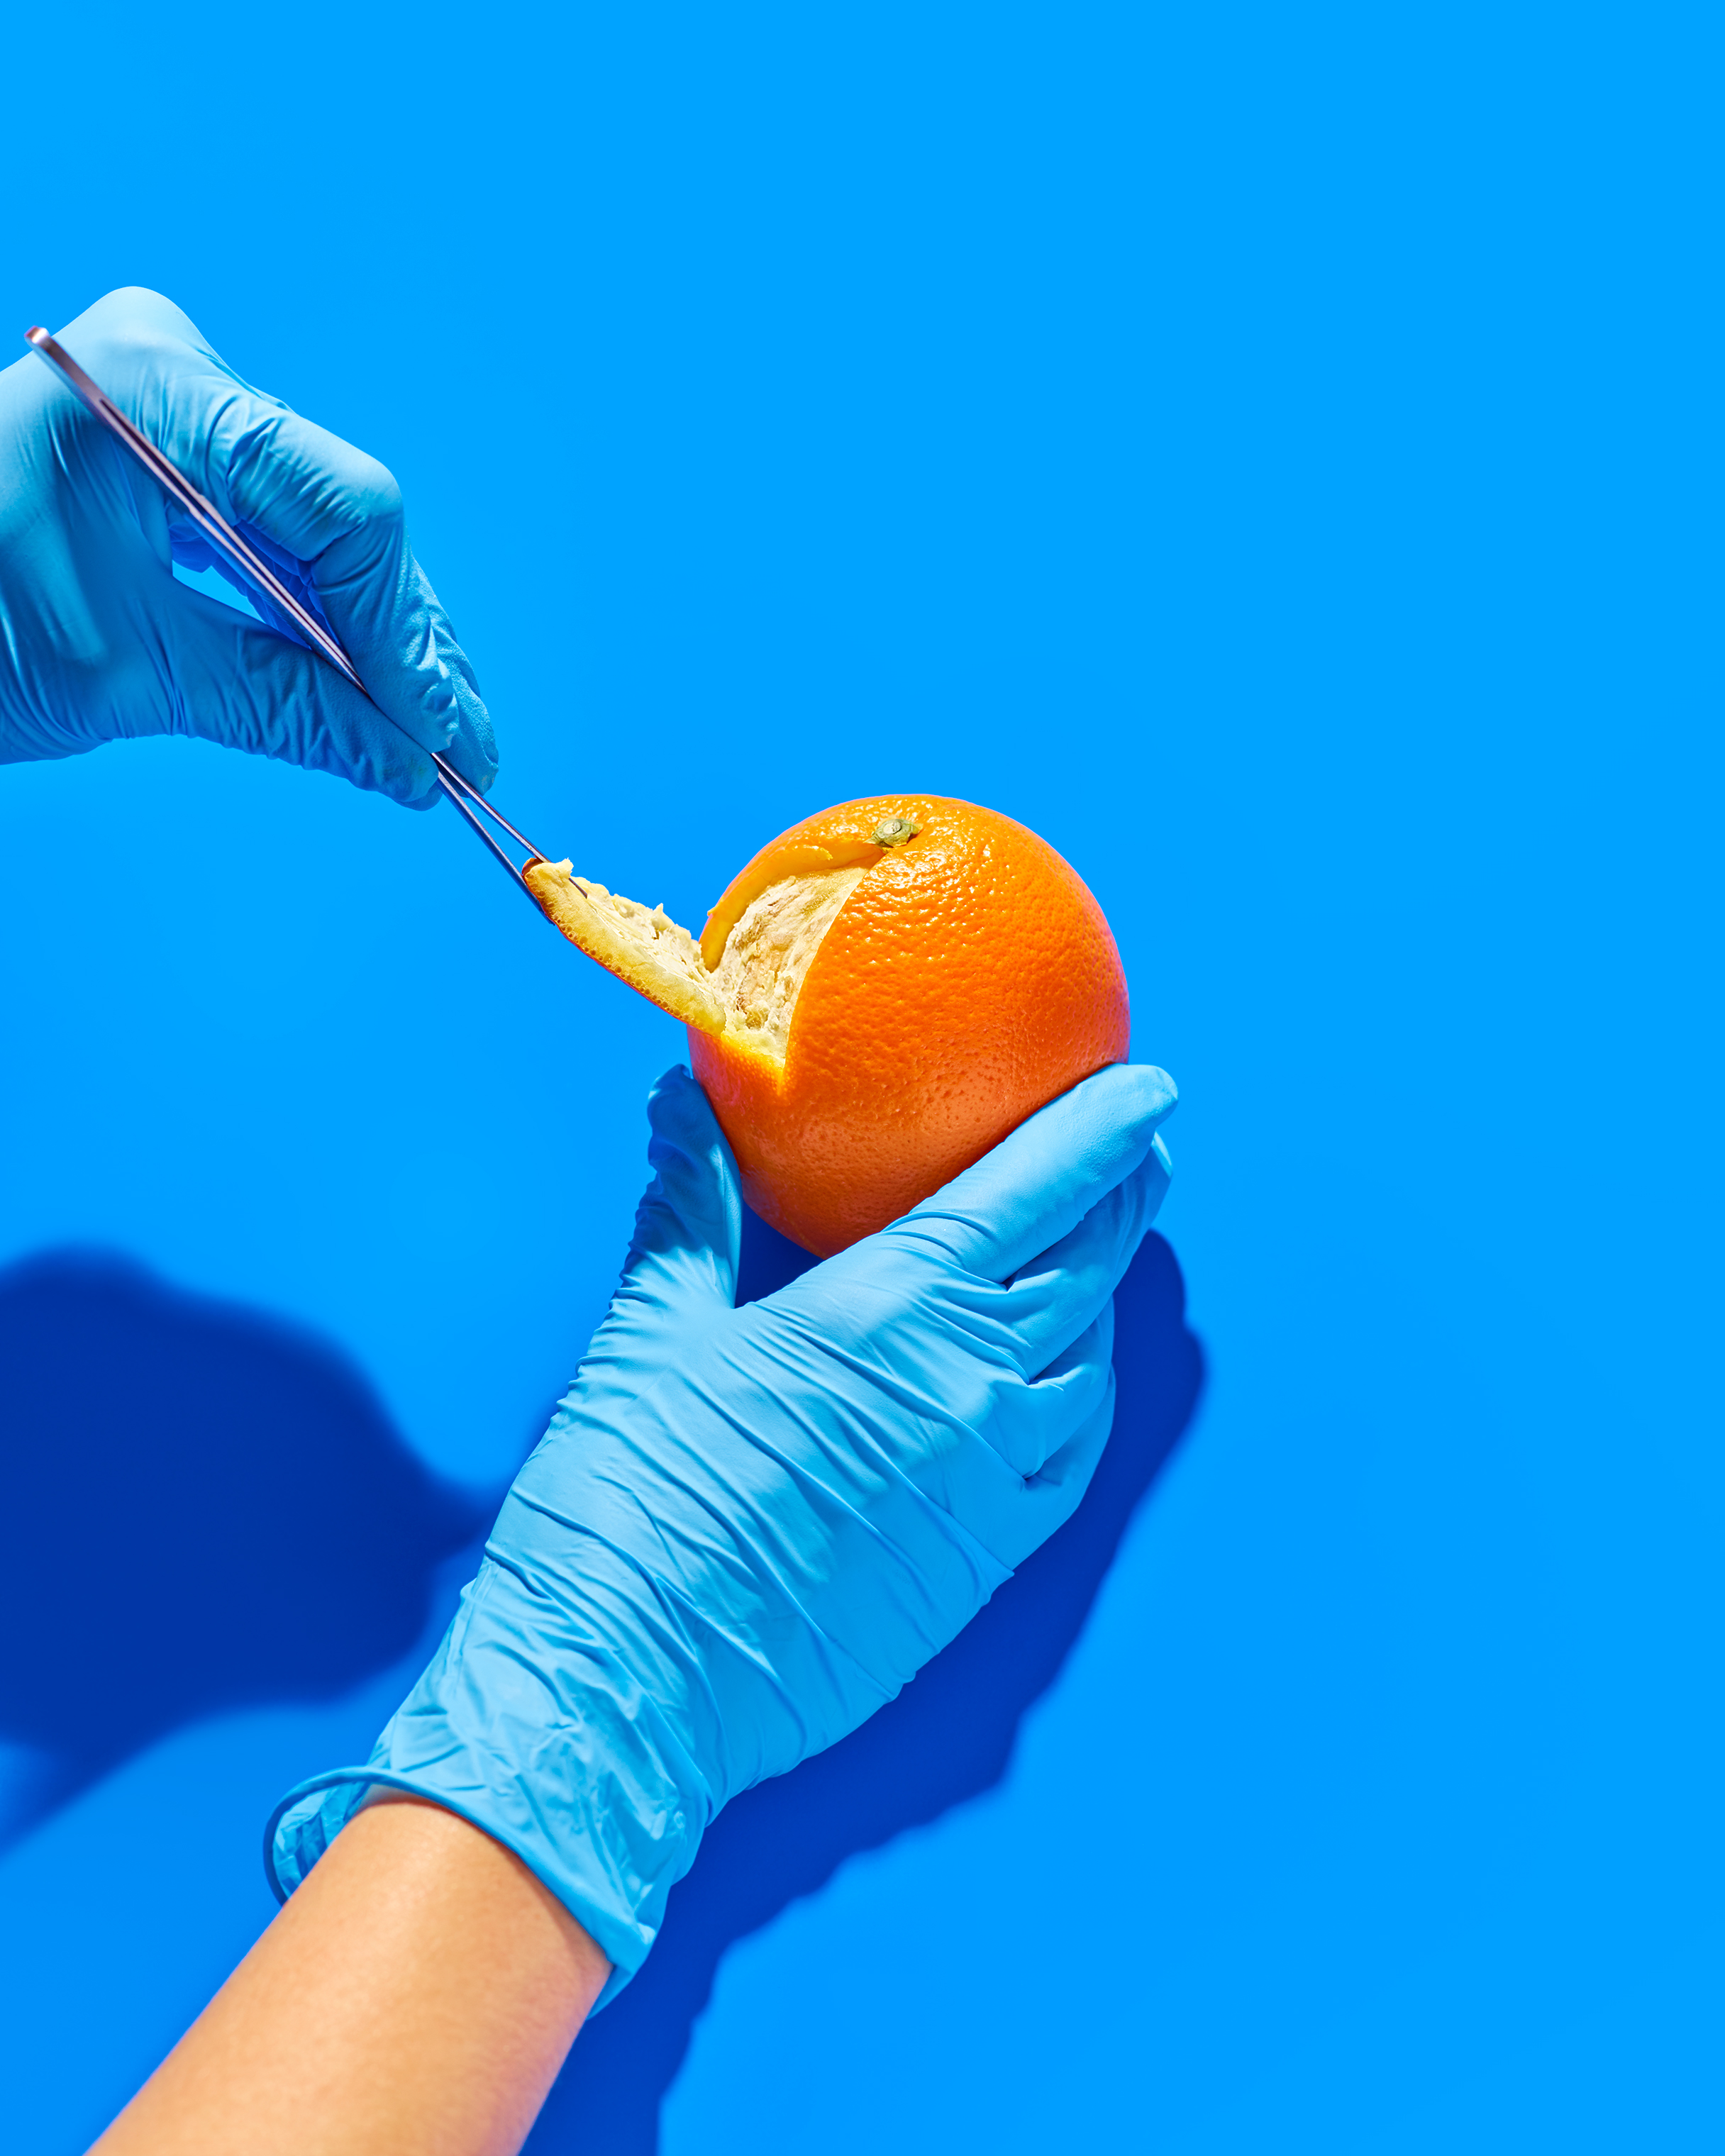 ORANGES | Rich in vitamin C, which can increase the production of certain immune cells in the body. These cells can control overactive immune reactions in autoimmune diseases like lupus (Zachary Zavislak for TIME)